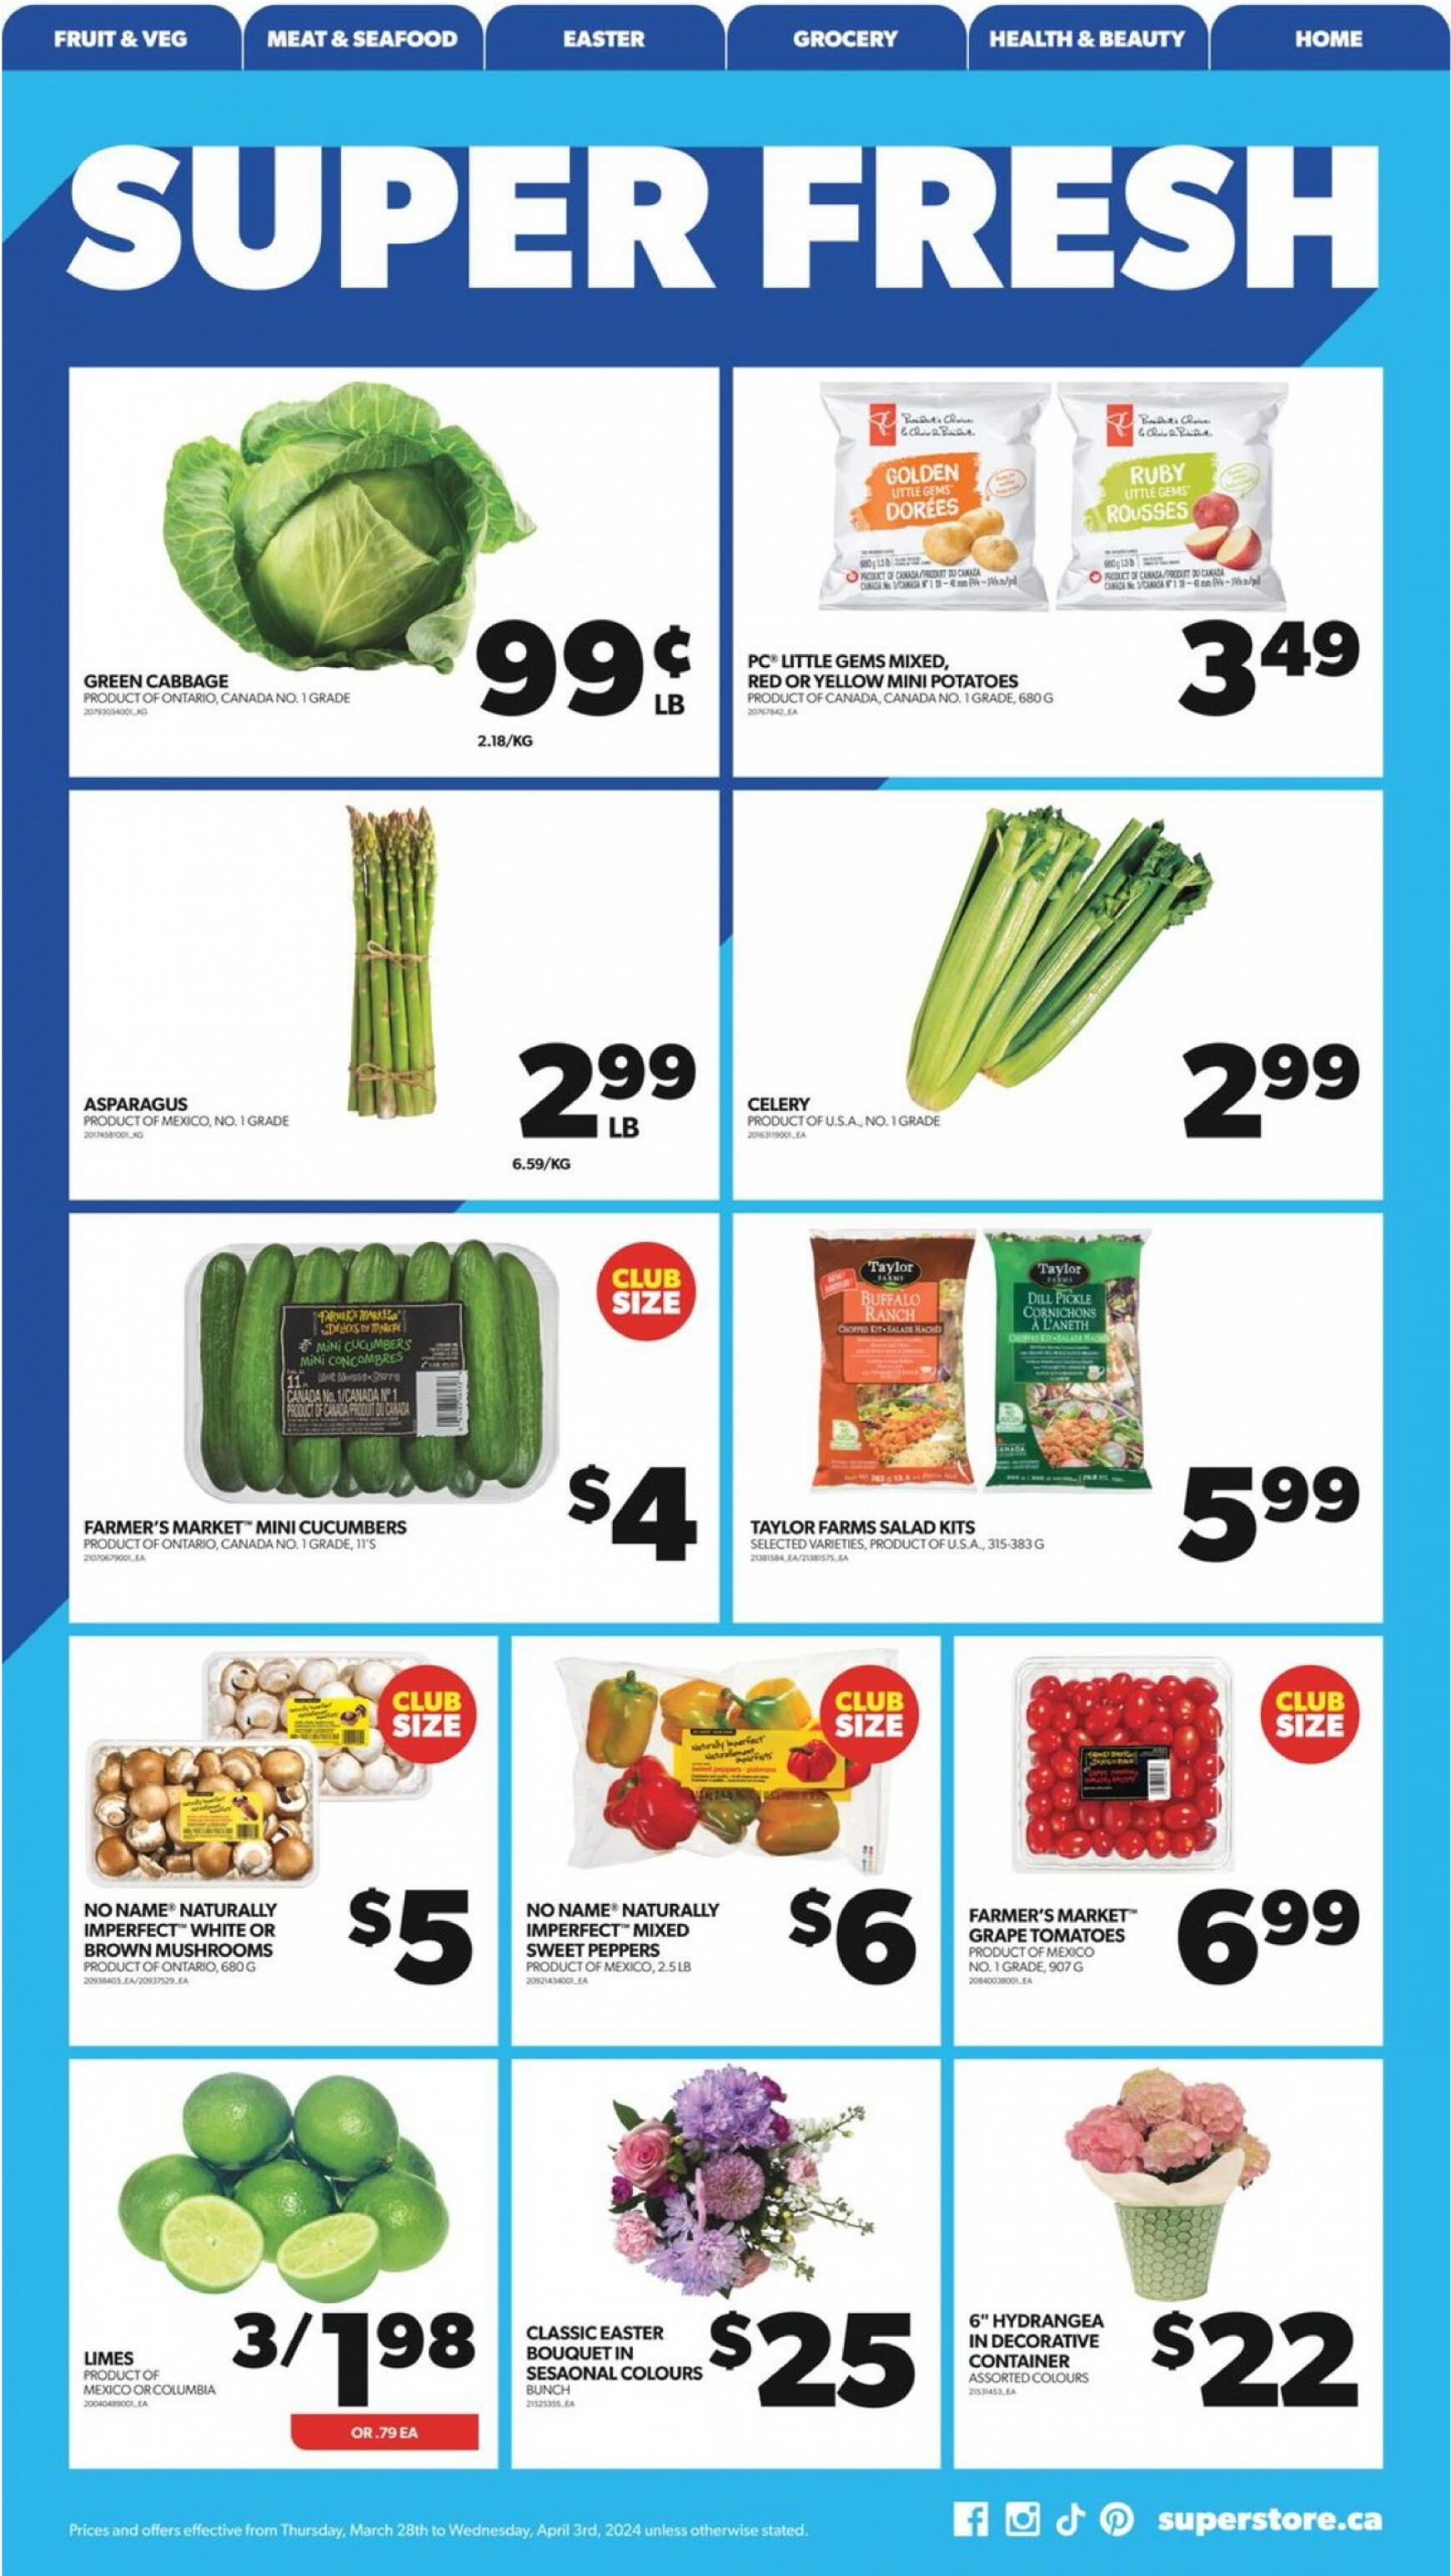 real-canadian-superstore - Real Canadian Superstore flyer current 28.03. - 03.04. - page: 12